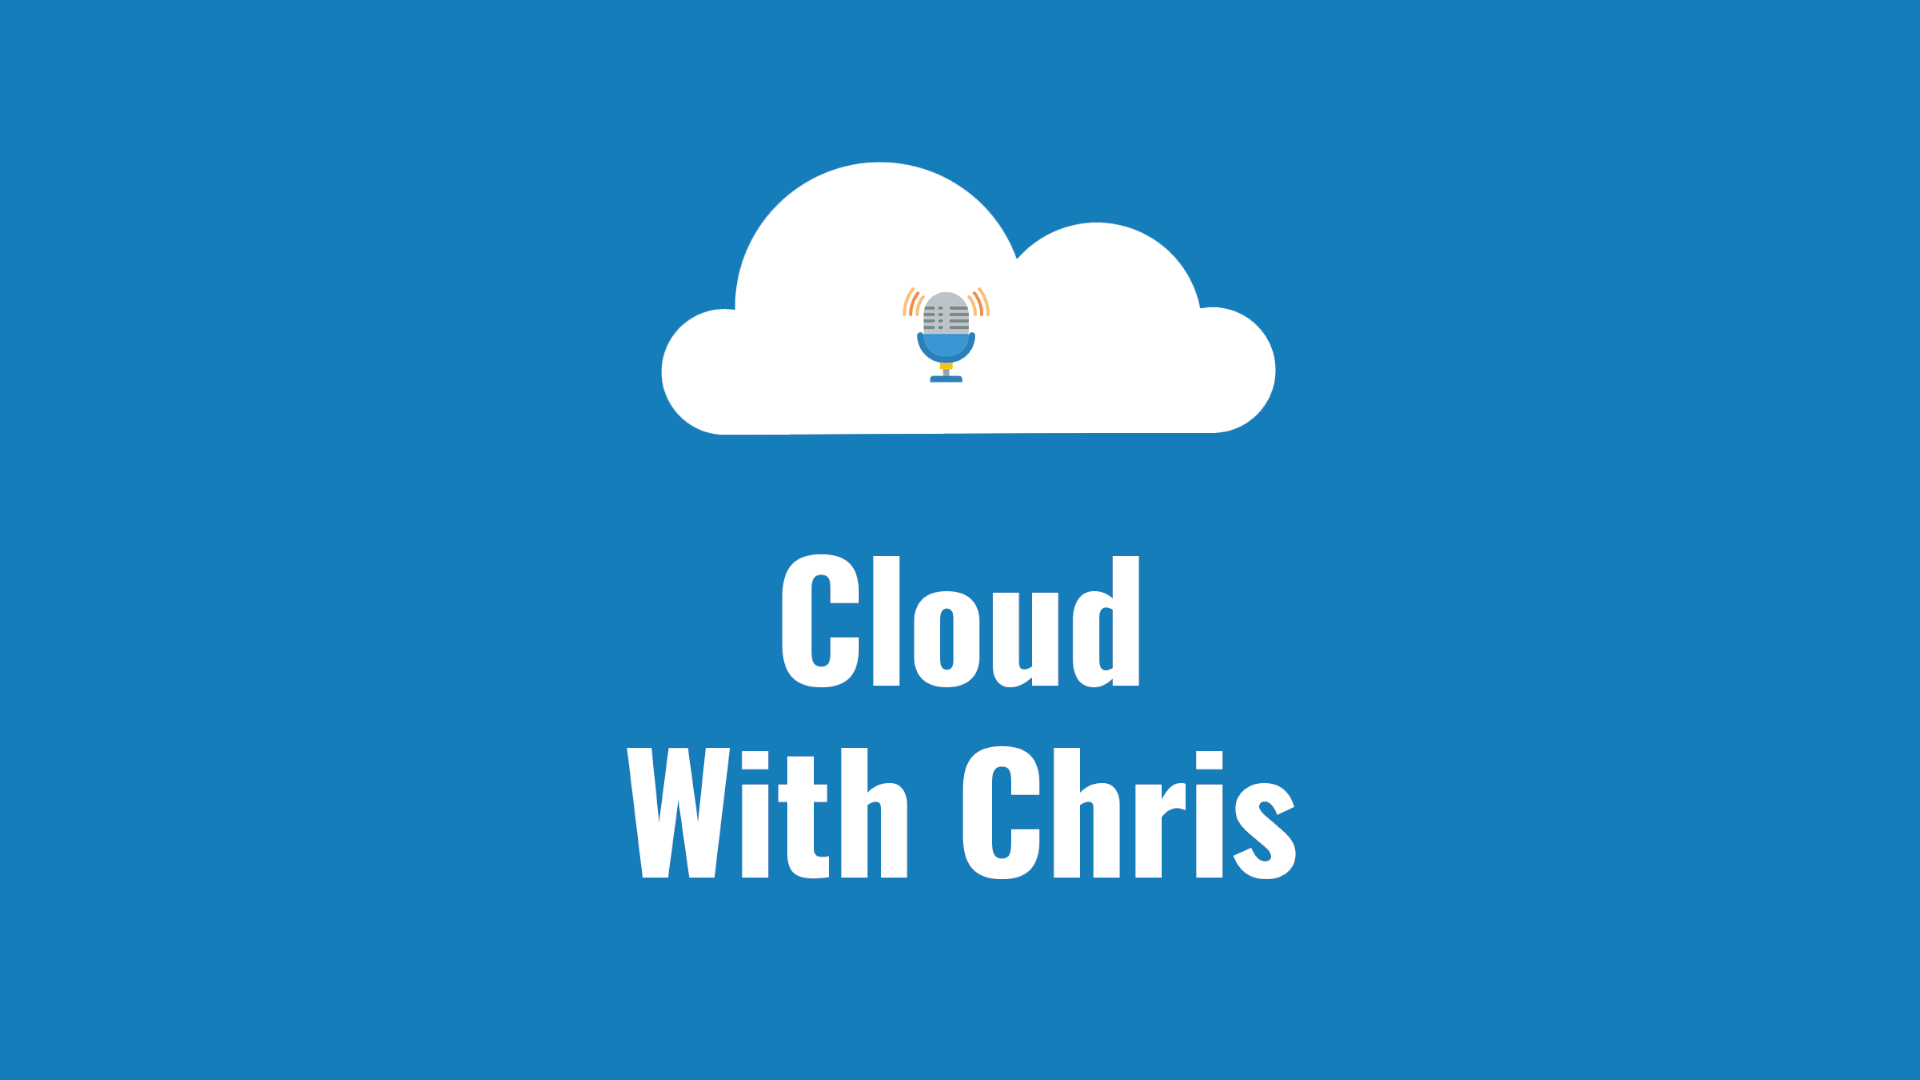 7 - Creating Cloud with Chris